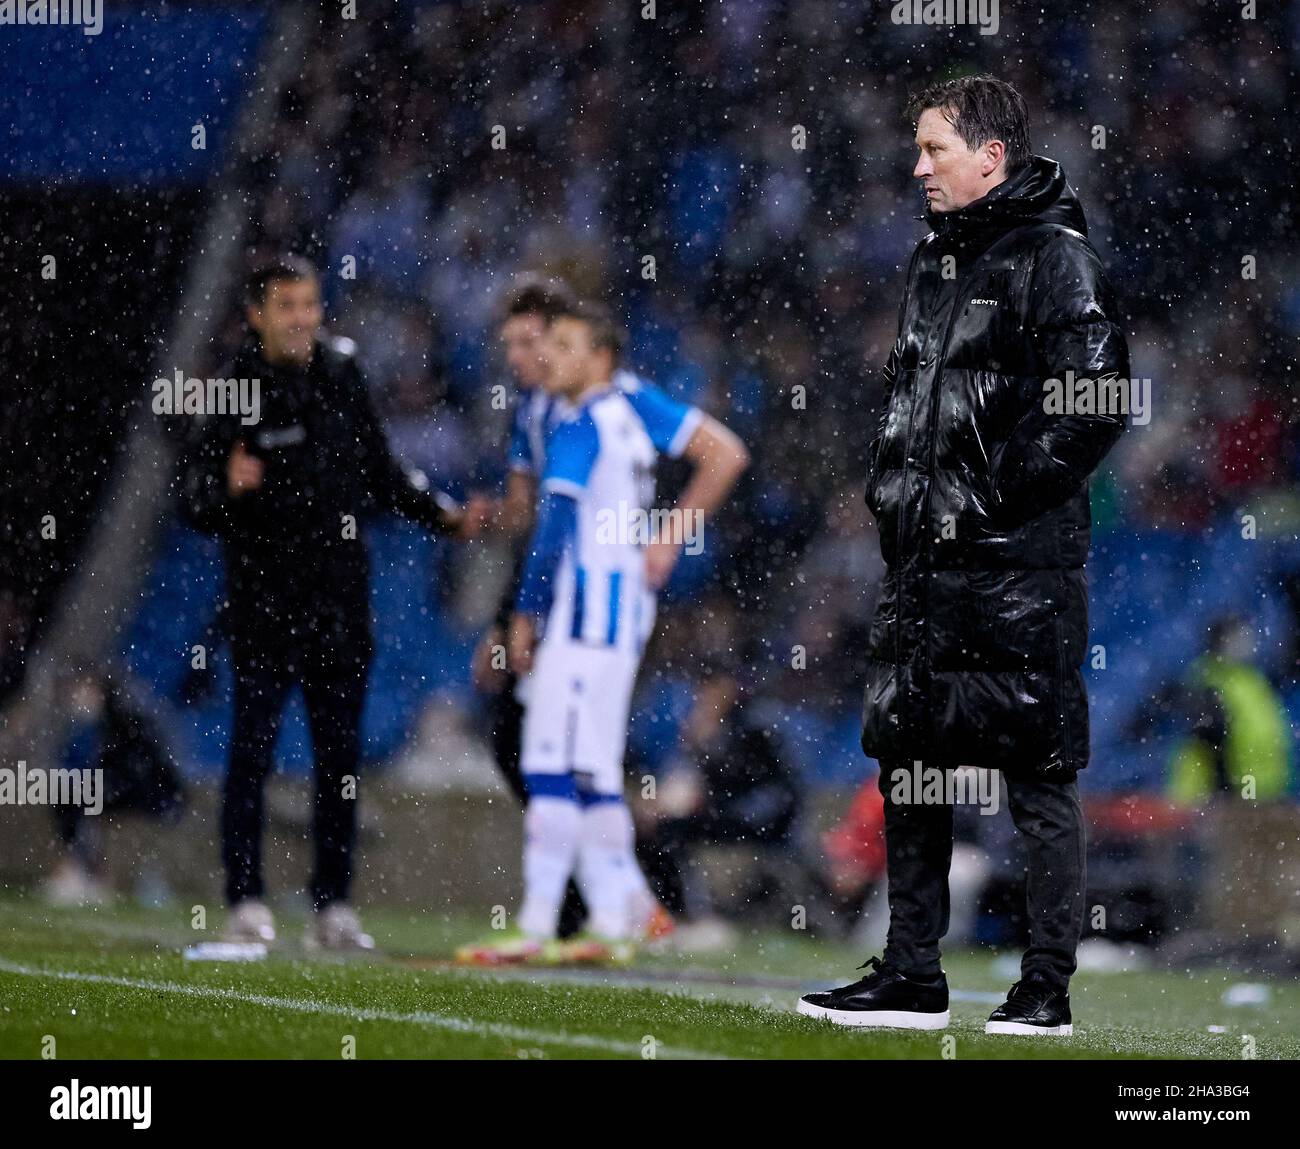 SAN SEBASTIAN, SPAIN - DECEMBER 09: Roger Schmidt Head coach of PSV Eindhoven looks on during the UEFA Europa League group B match between Real Sociedad and PSV Eindhoven at Estadio Anoeta on December 9, 2021 in San Sebastian, Spain. (Photo by MB Media) Stock Photo